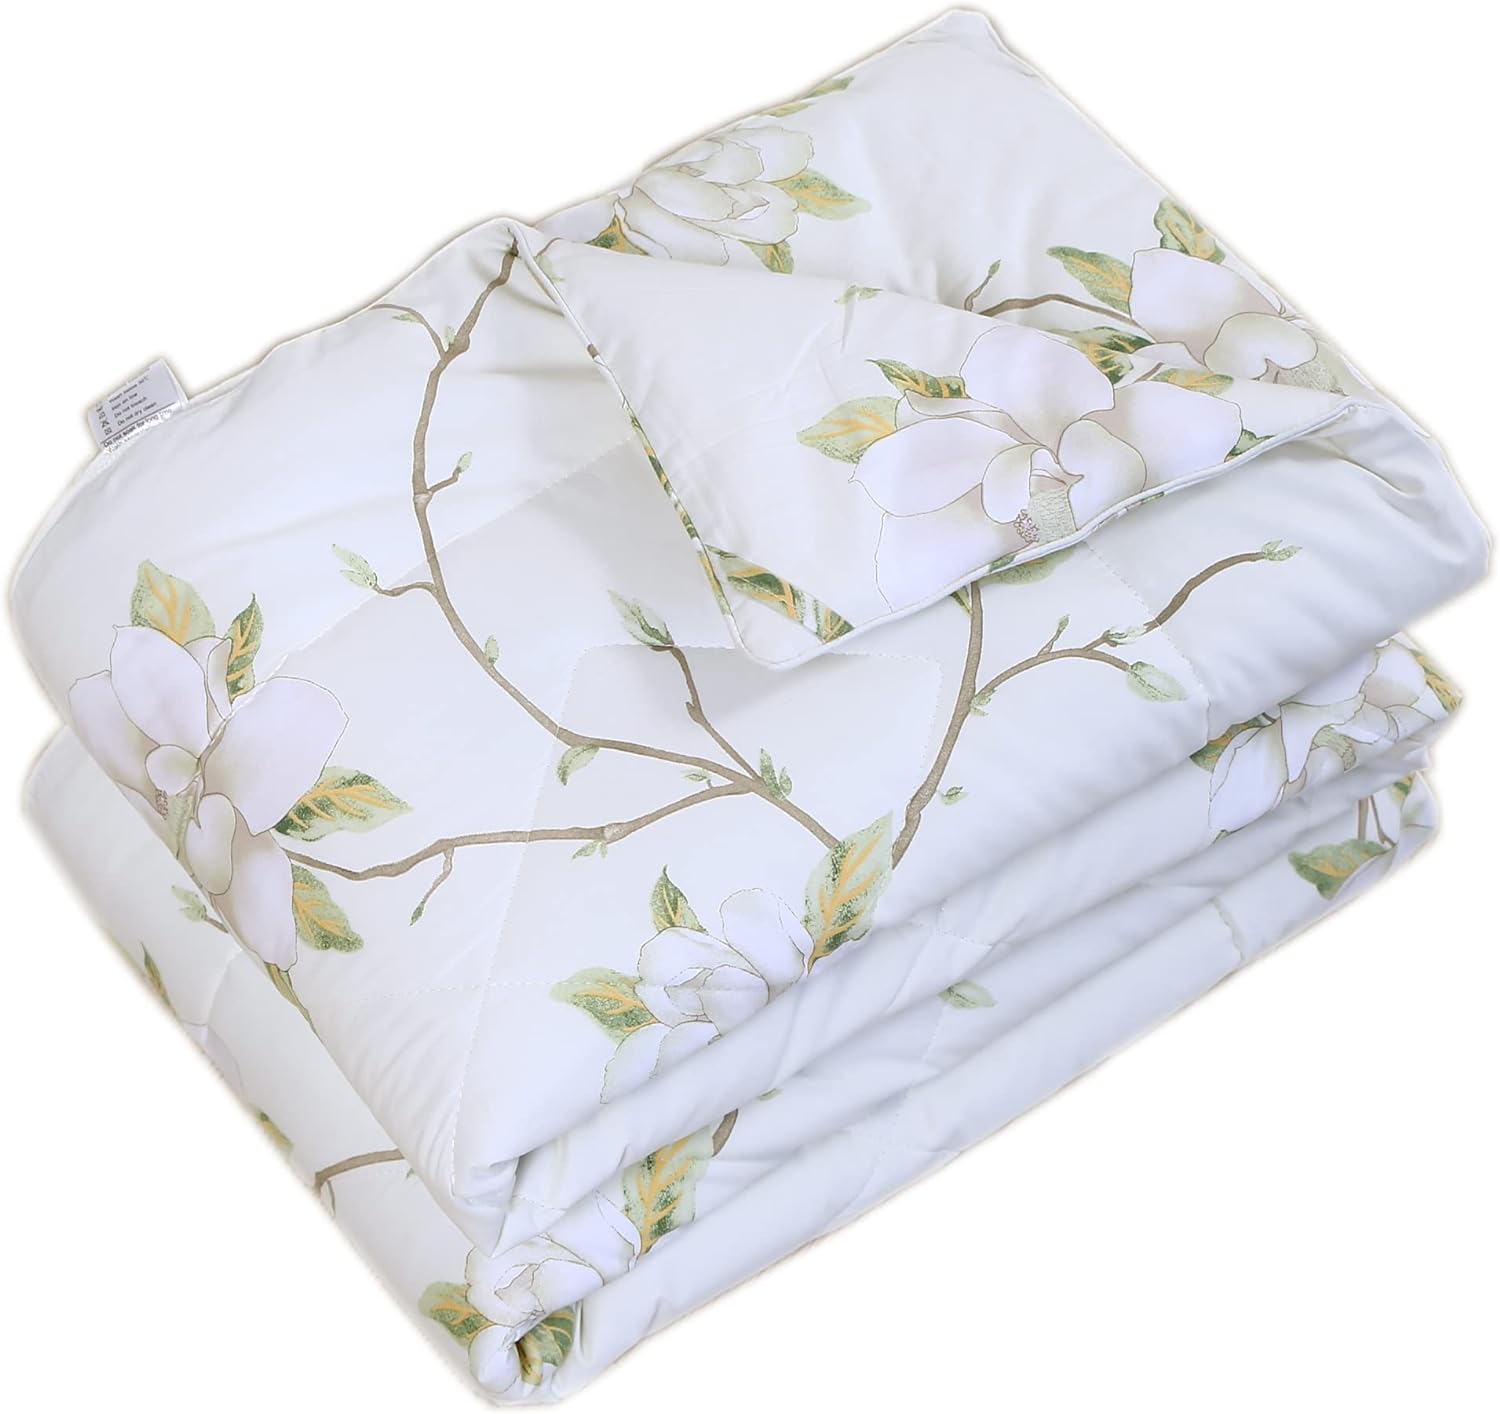 FADFAY White Floral Comforter Set Twin Shabby Floral Summer Quilt 100% Cotton Fabric with Soft Microfiber Inner Fill Bedding Lightweight Reversible All Season Down Alternative Duvet Insert 3Pcs, Twin